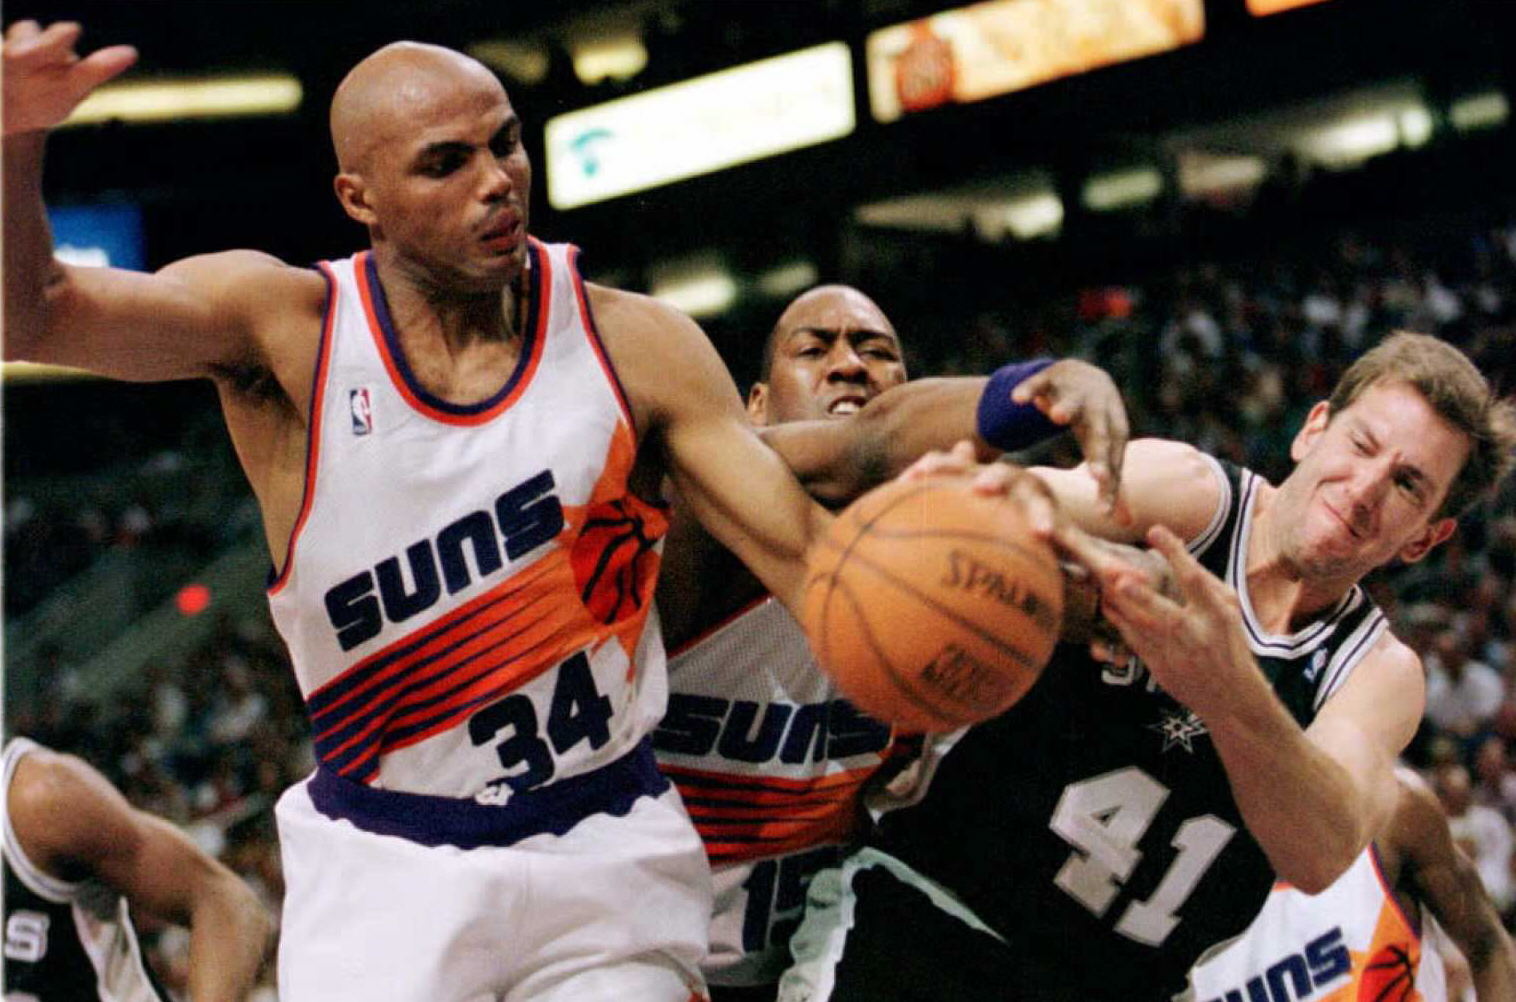 Charles Barkley battles Will Perdue for a rebound.